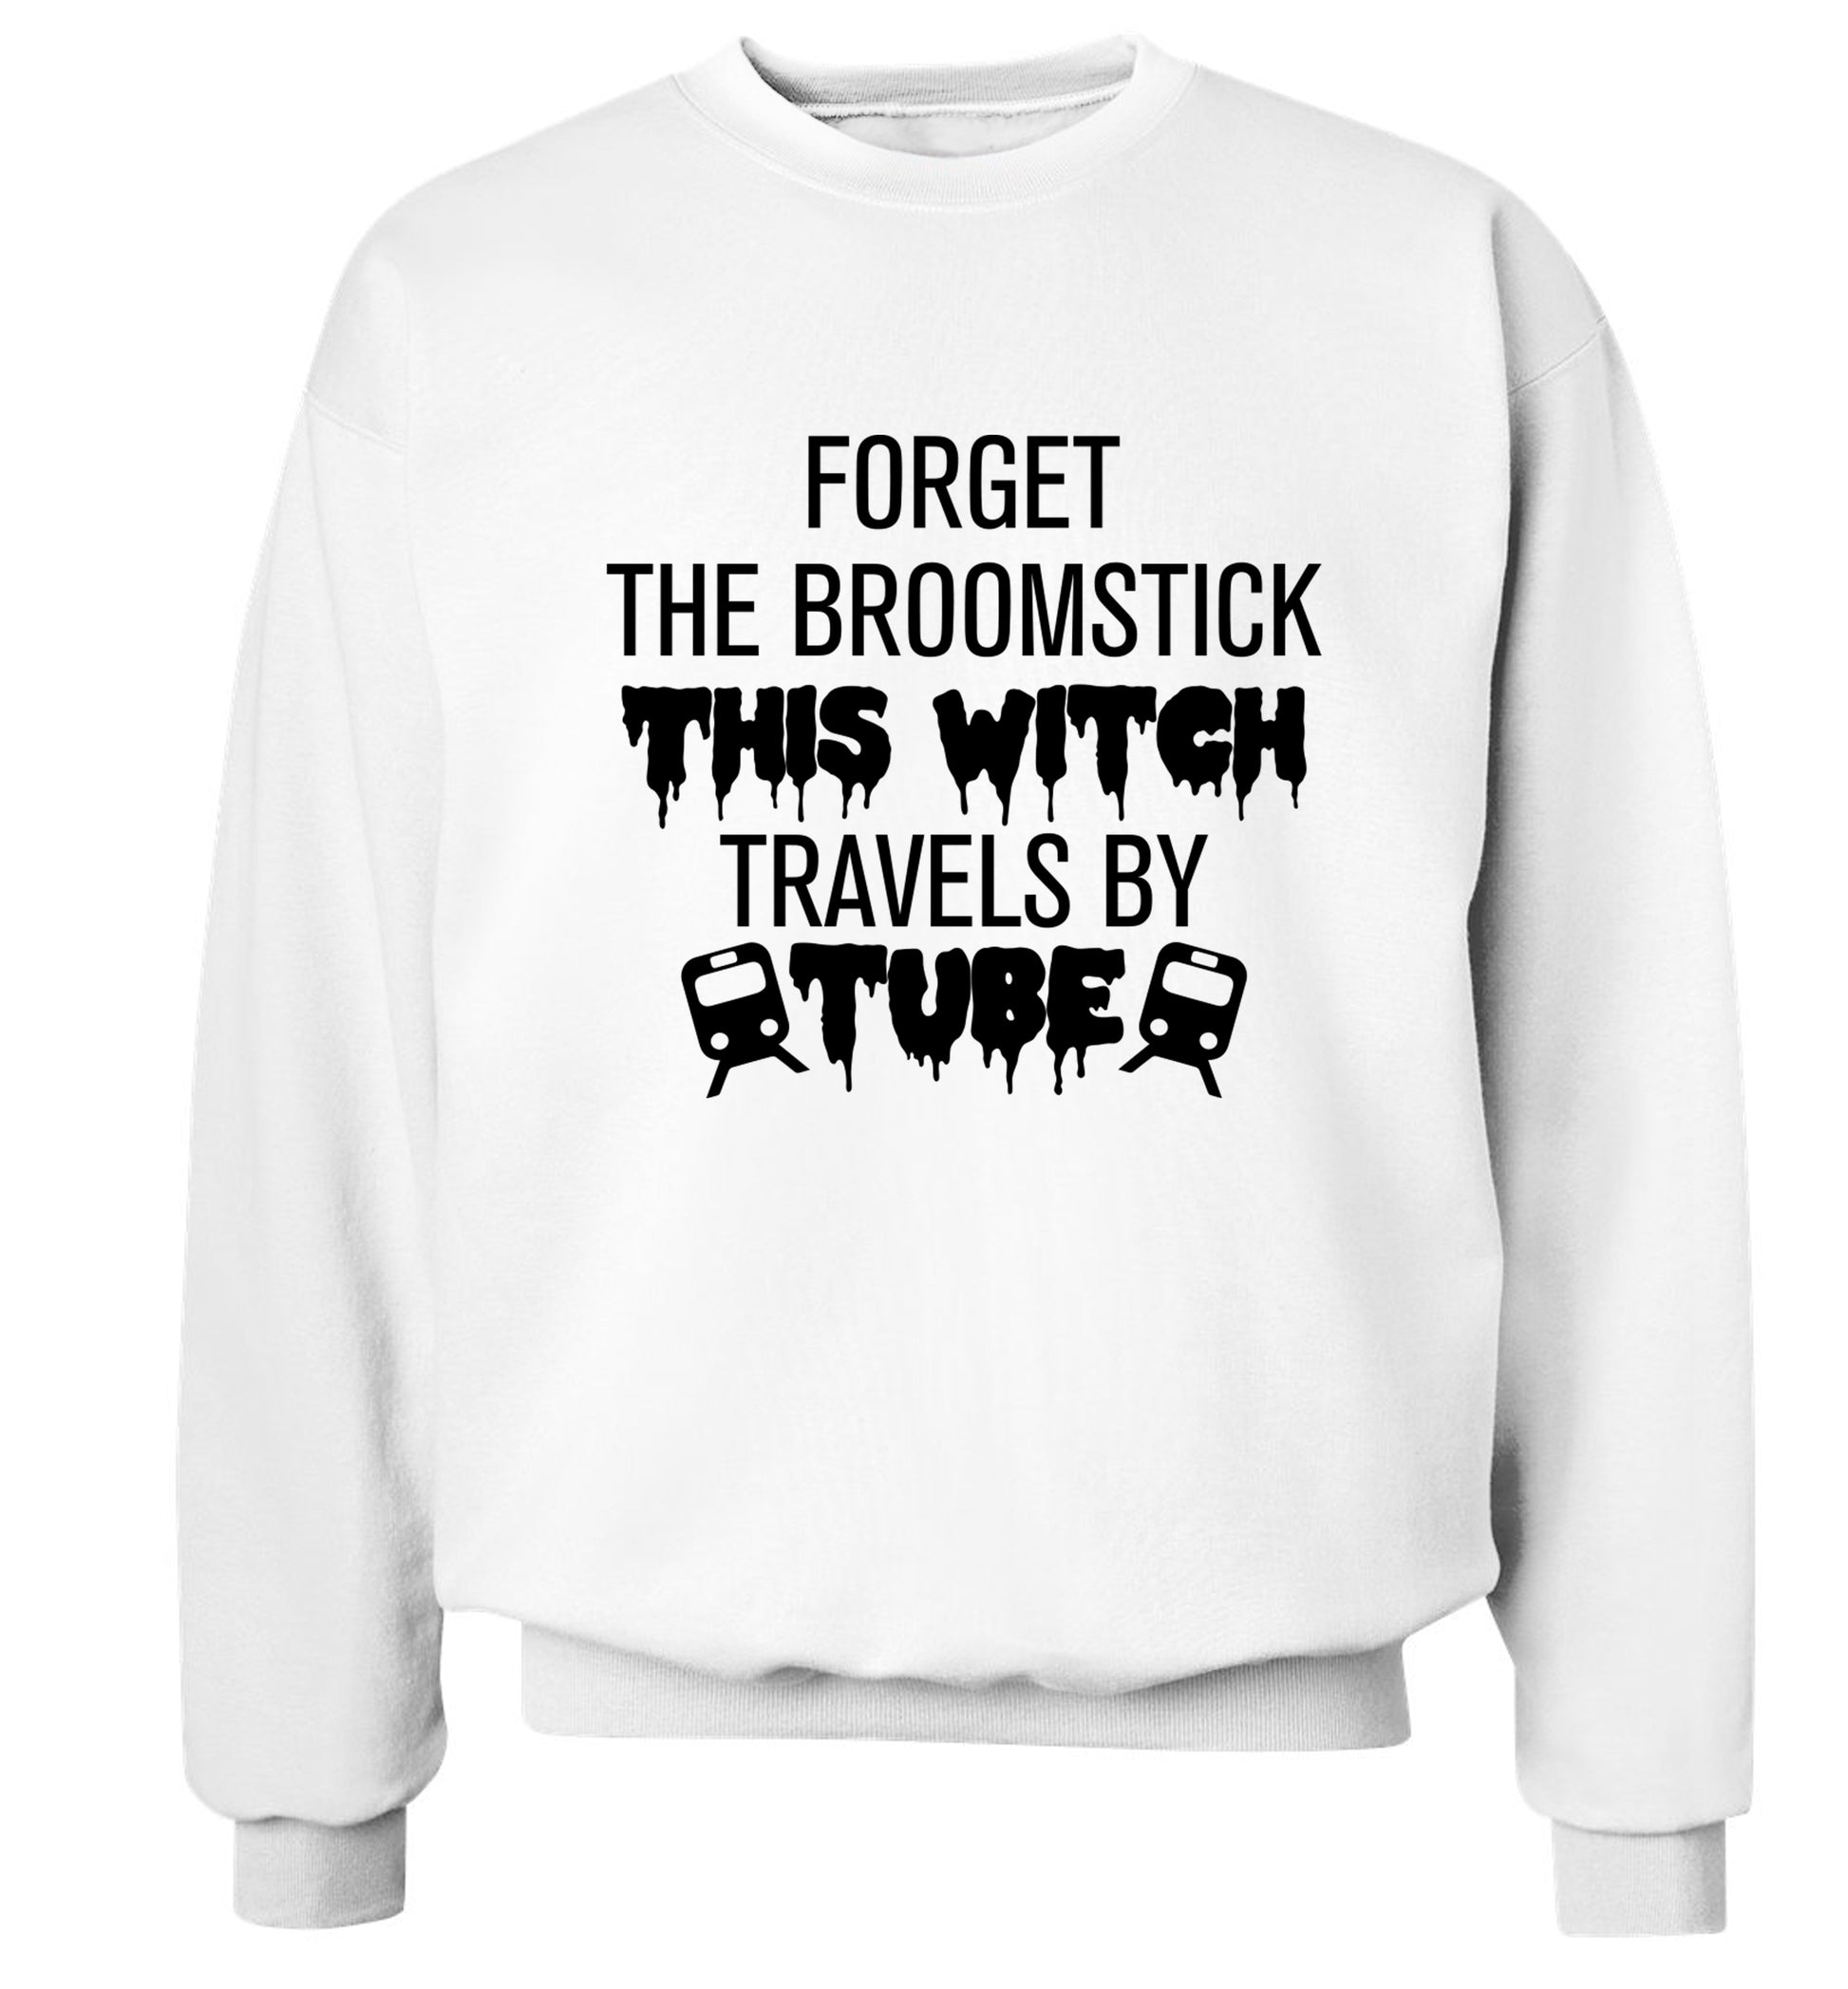 Forget the broomstick this witch travels by tube Adult's unisexwhite Sweater 2XL